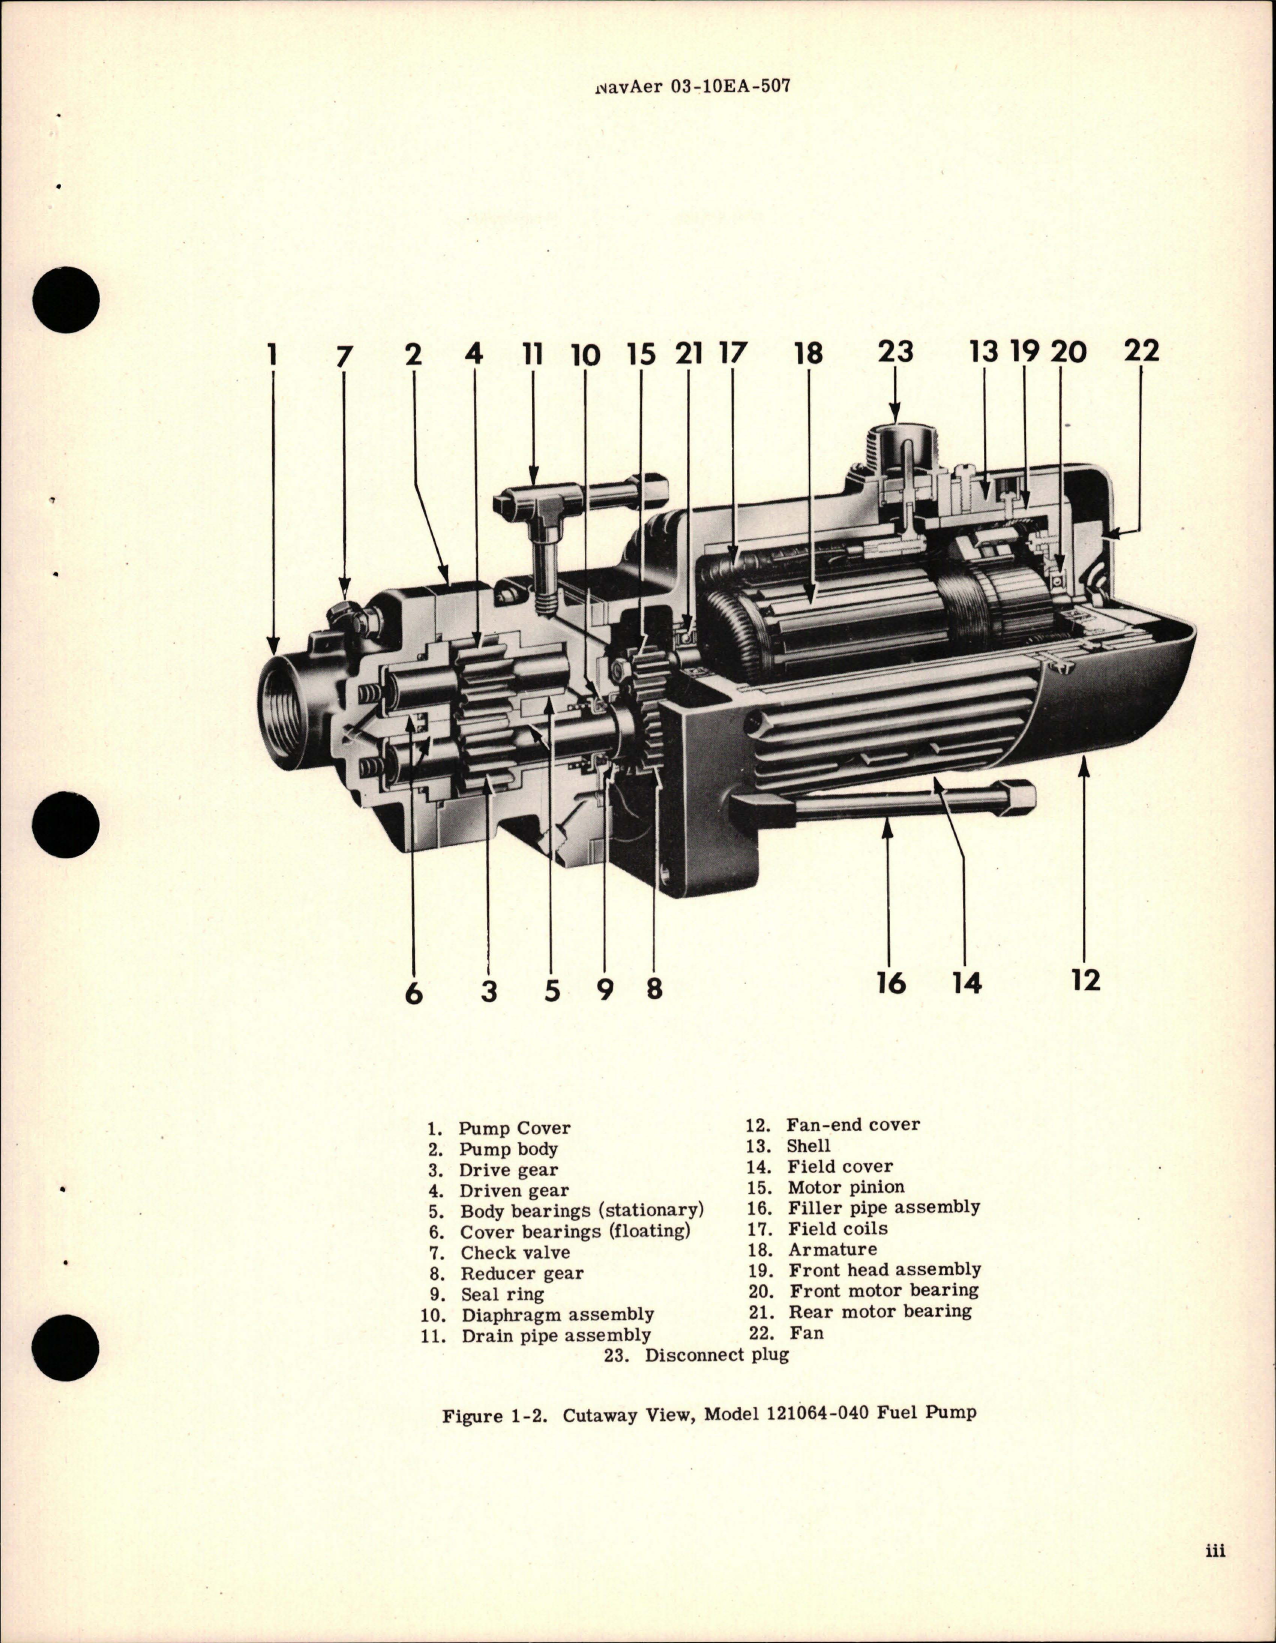 Sample page 5 from AirCorps Library document: Operation and Service Instructions for Motor Driven Fuel Pumps - Models 121064-012, 121064-040, and 121064-020